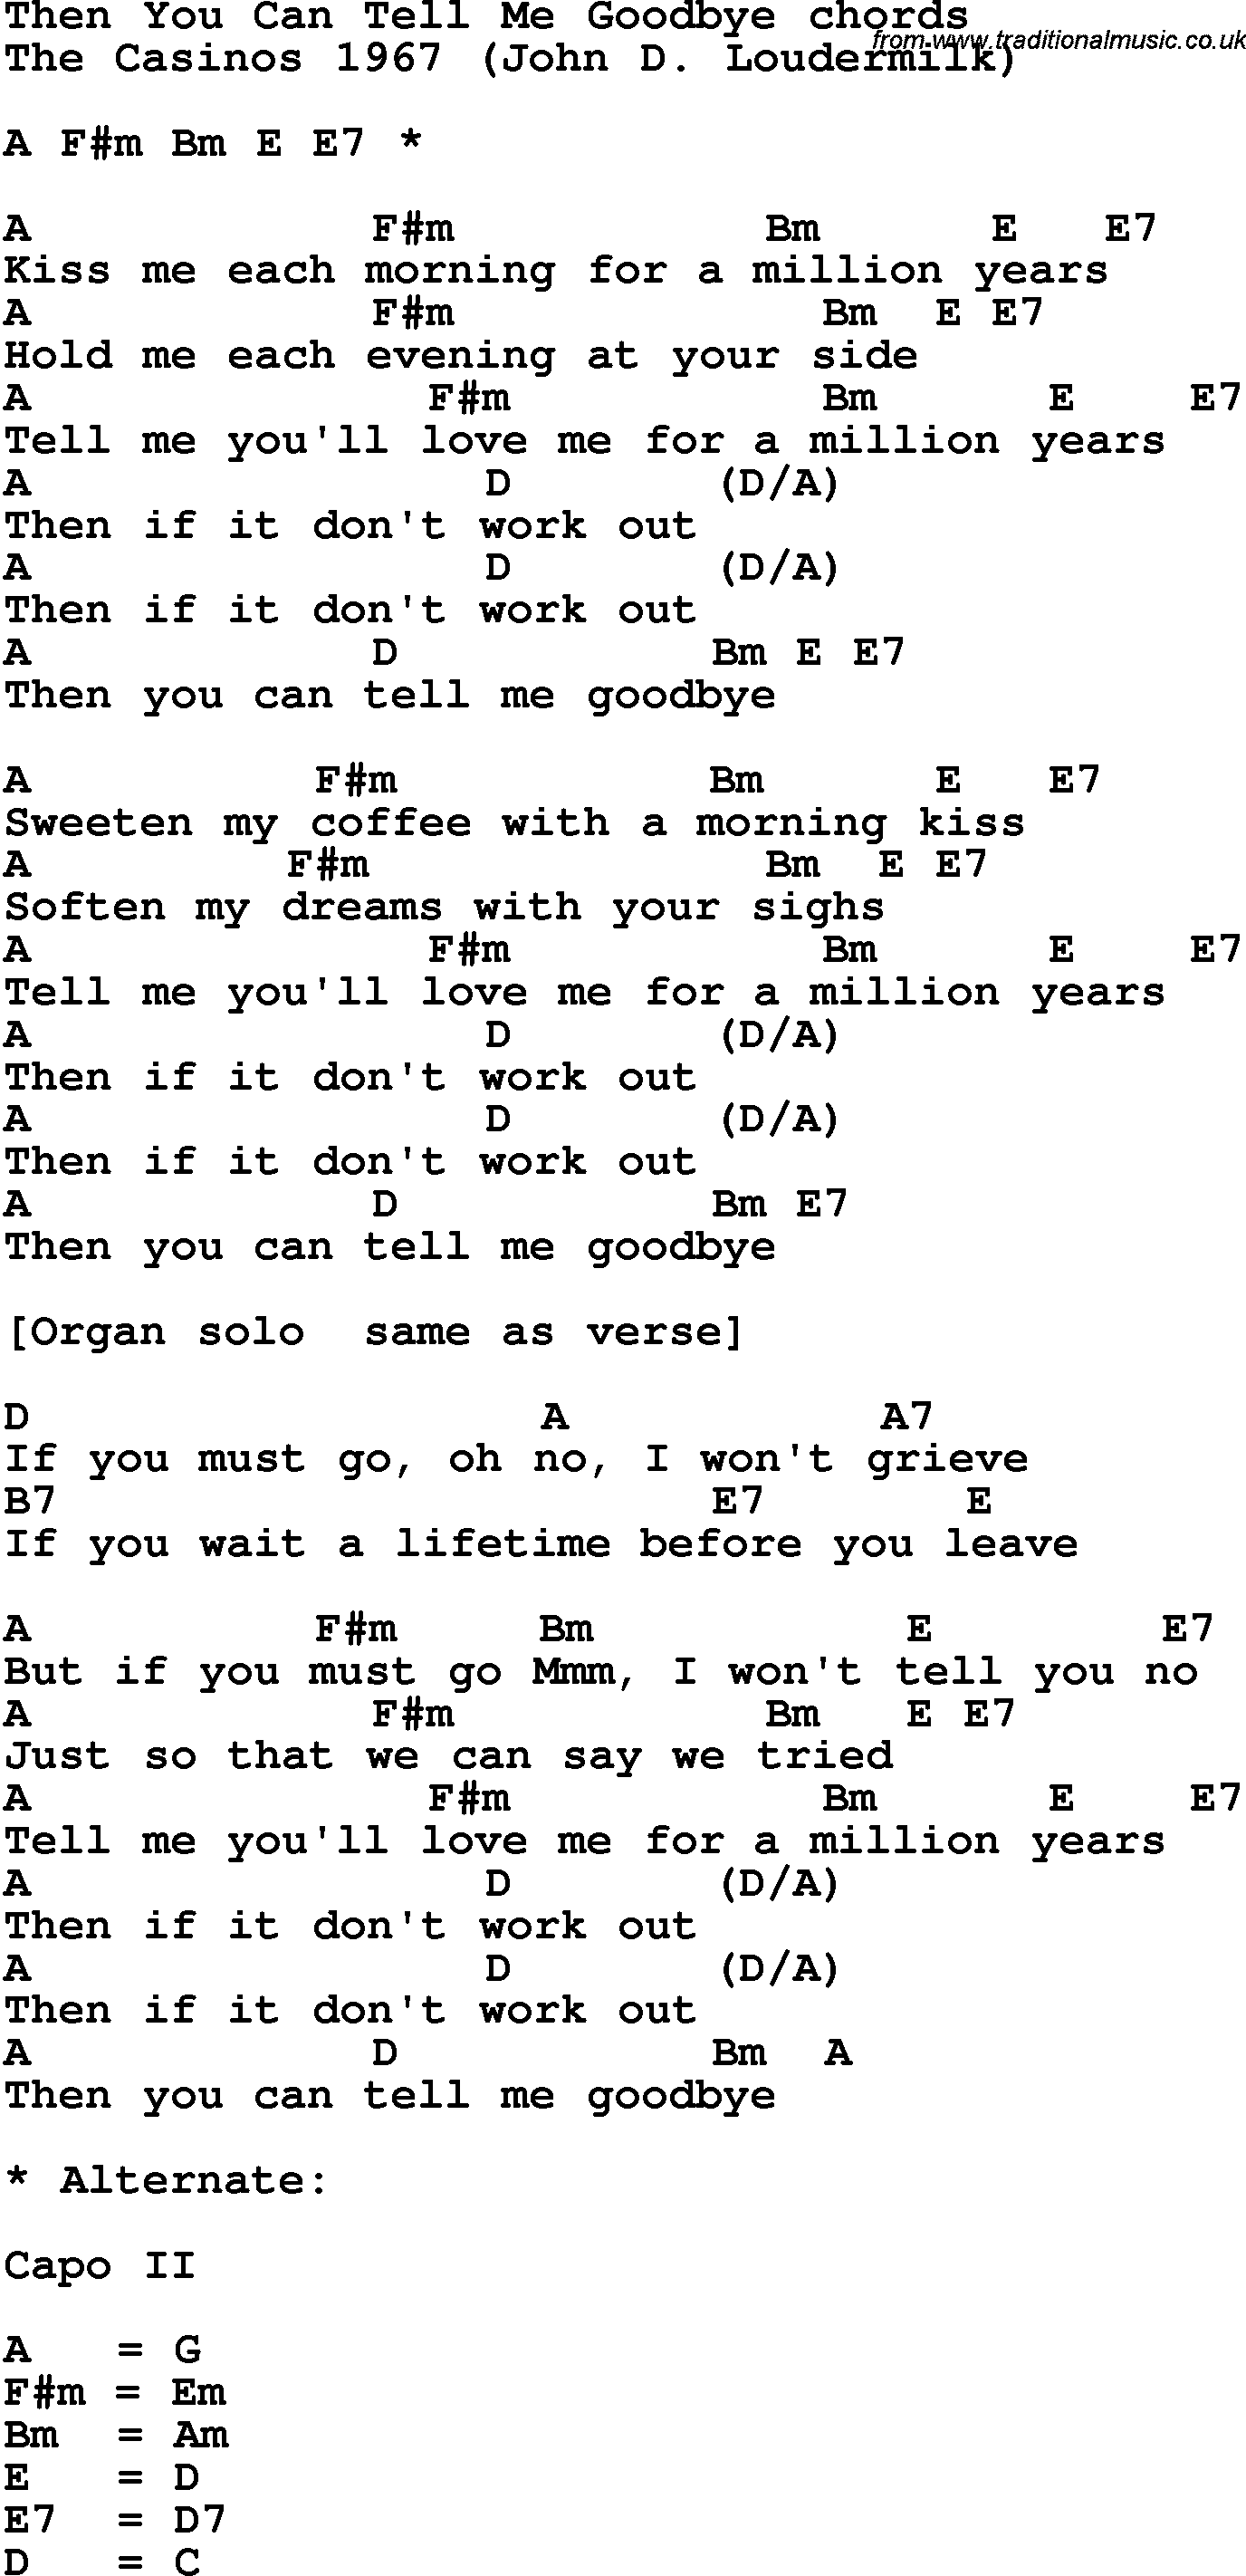 Song lyrics with guitar chords for Then You Can Tell Me Goodbye